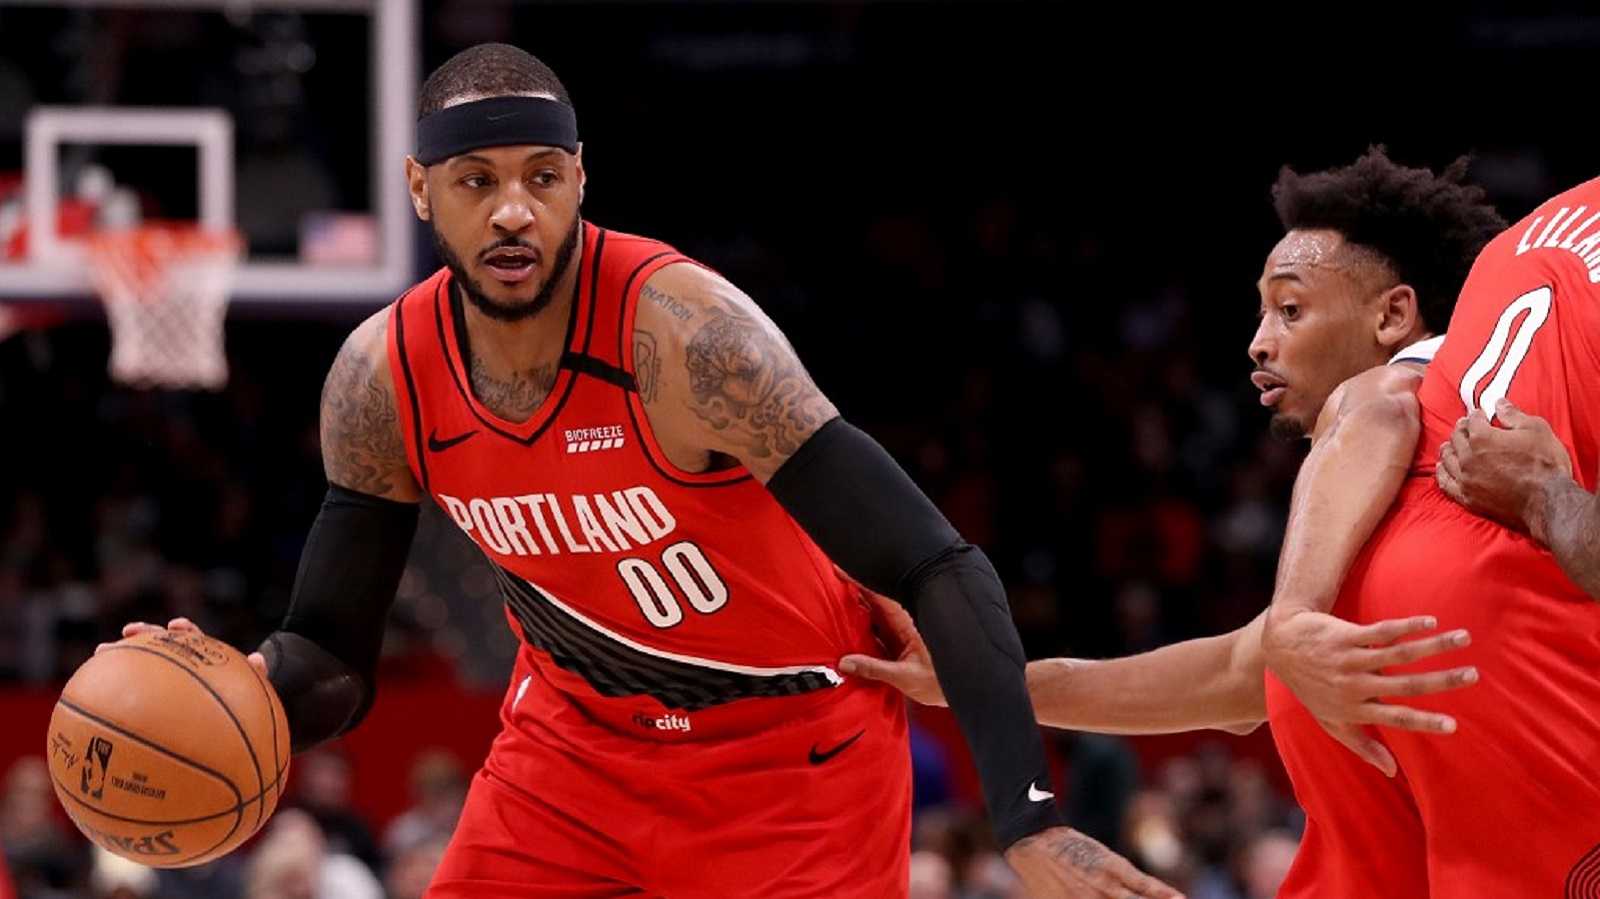 Nba players: carmelo anthony profile and basic stats